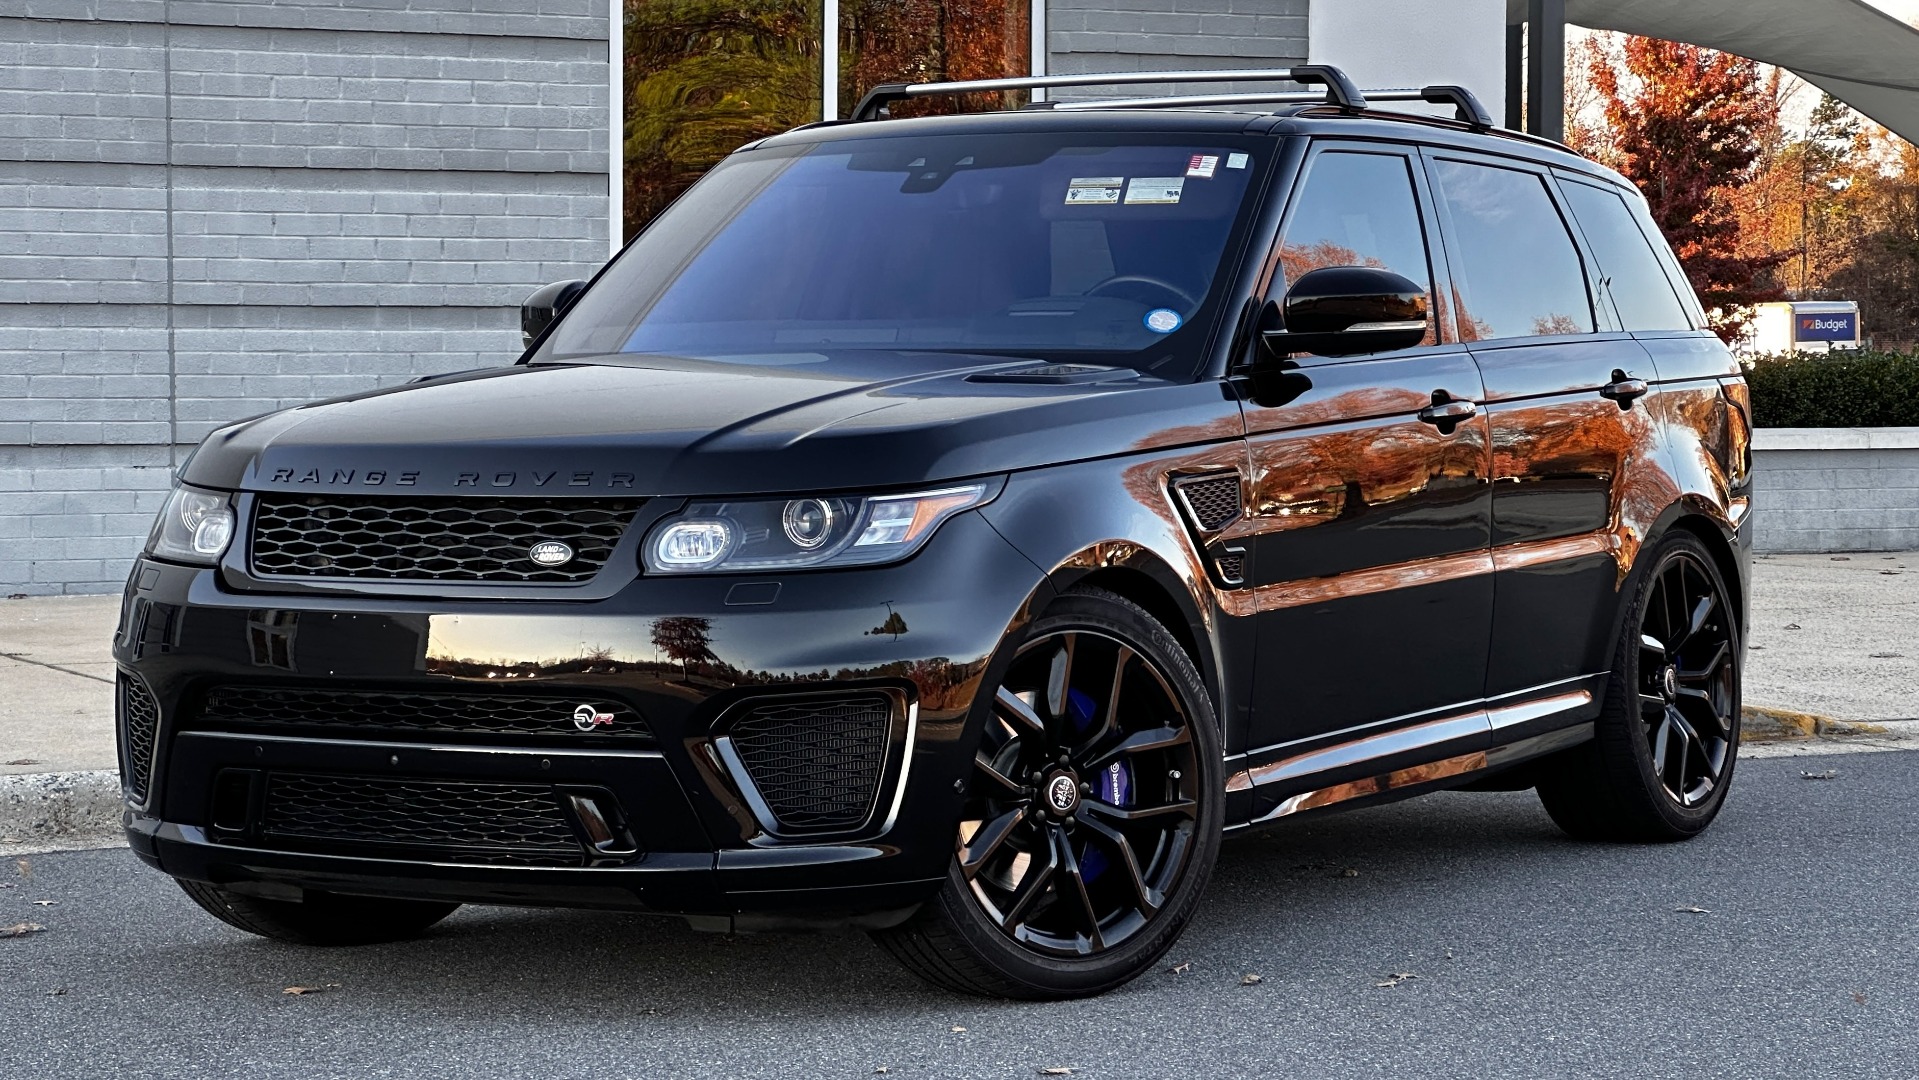 Used 2017 Land Rover Range Rover Sport SVR / DRIVE PRO PACKAGE / MERIDIAN SURROUND SOUND / SUPERCHARGED V8 / PANOR for sale $63,999 at Formula Imports in Charlotte NC 28227 1